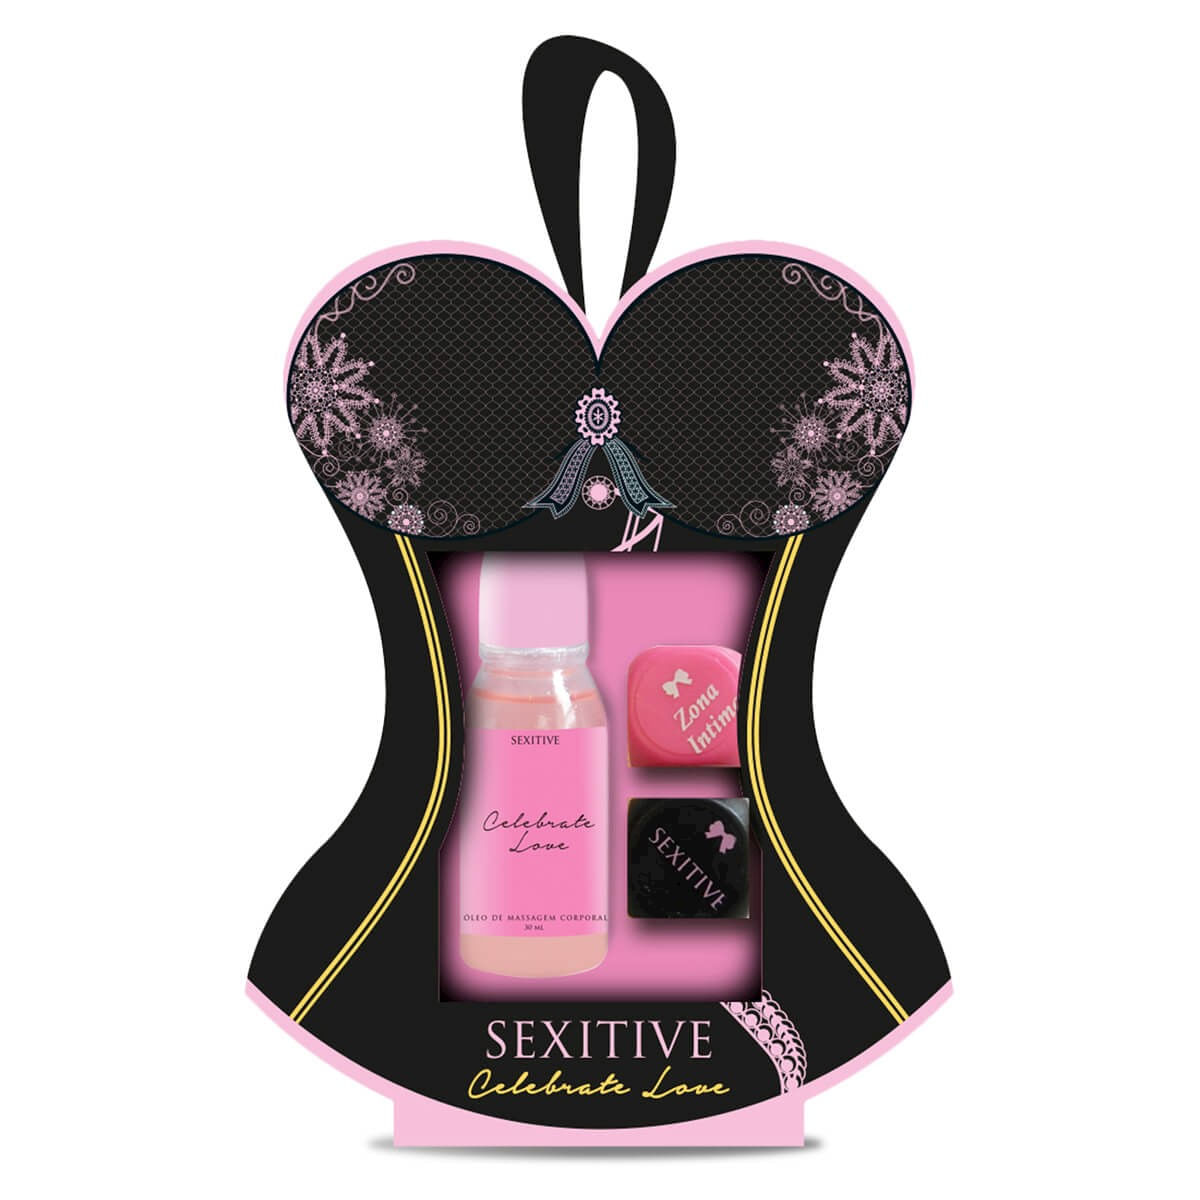 Kit For Lovers Celebration Love Sexitive